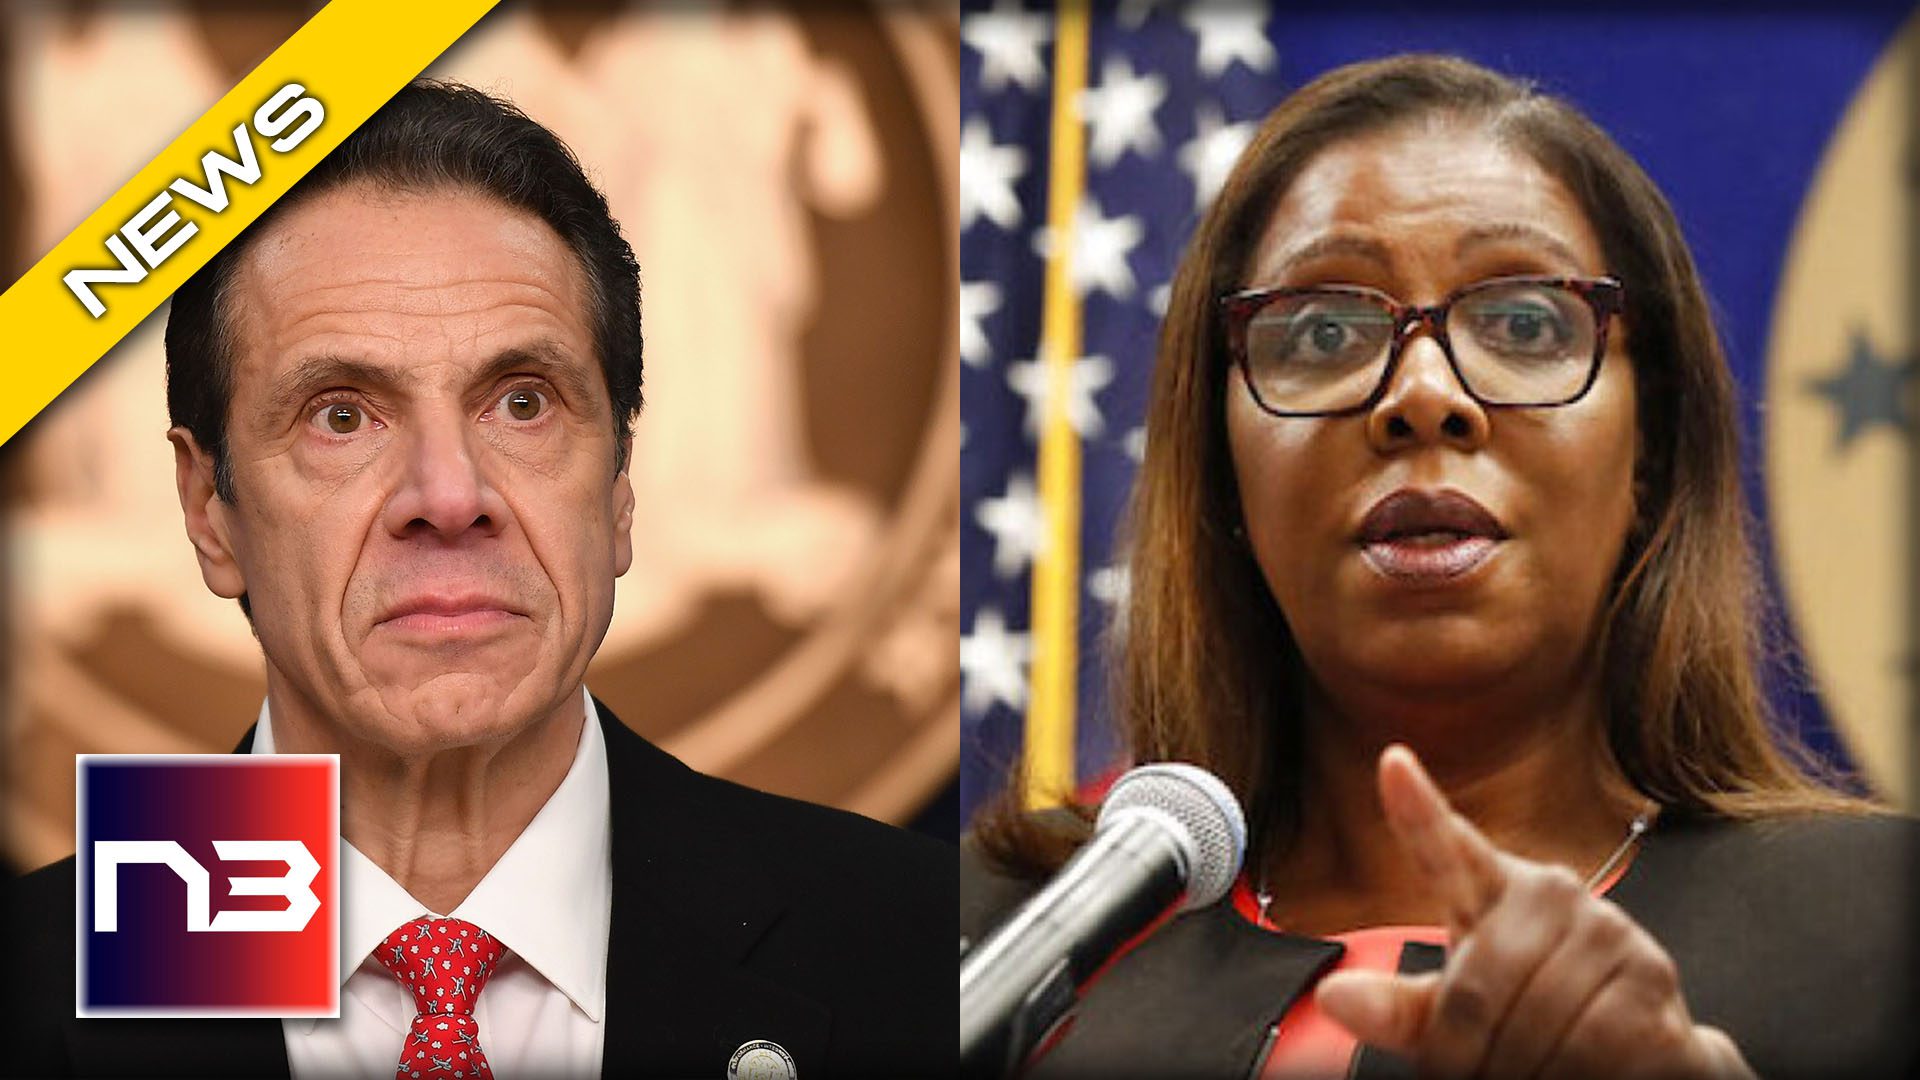 Watch DISGRACED Andrew Cuomo's CRAZY Attempt To Save His Political Career!